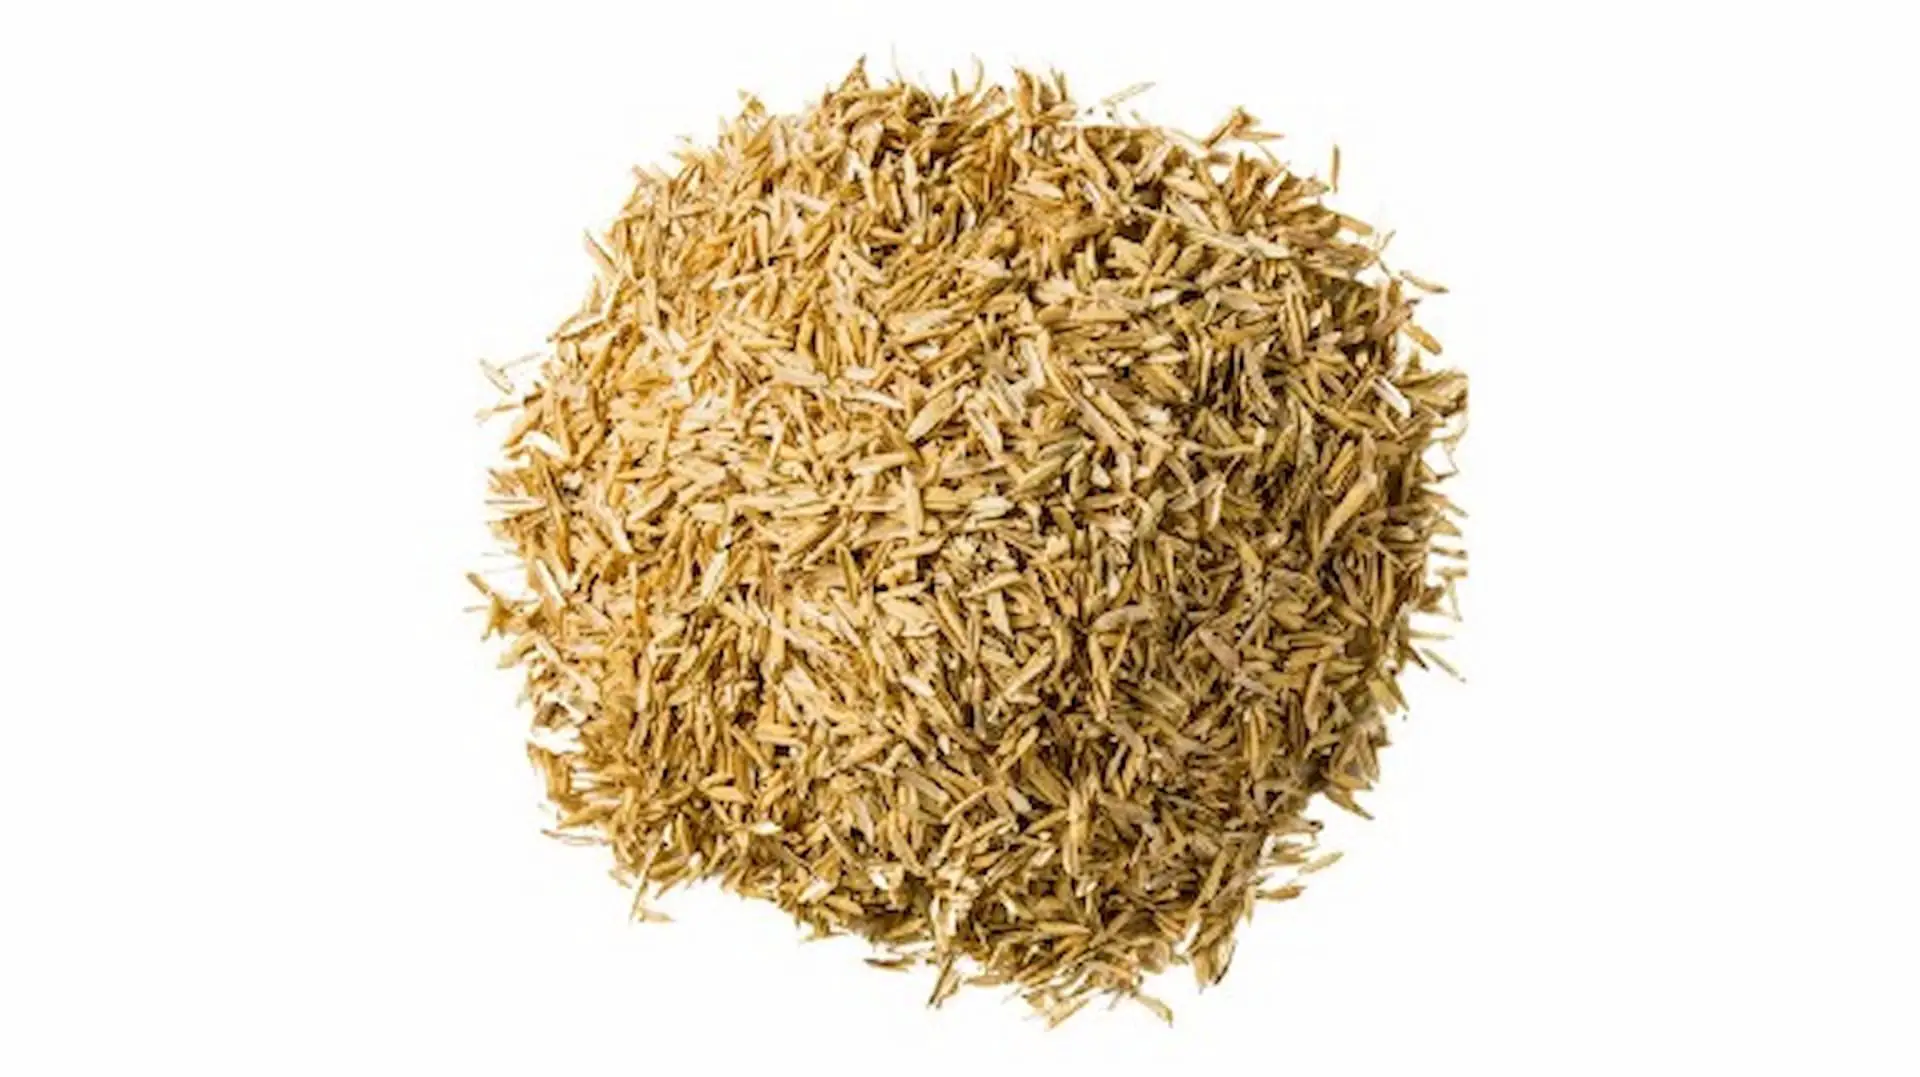 % Rice Hulls are a good hydroponic growing medium. They provide many nutrients essential to plant growth, are cost-effective, & are environmentally friendly.